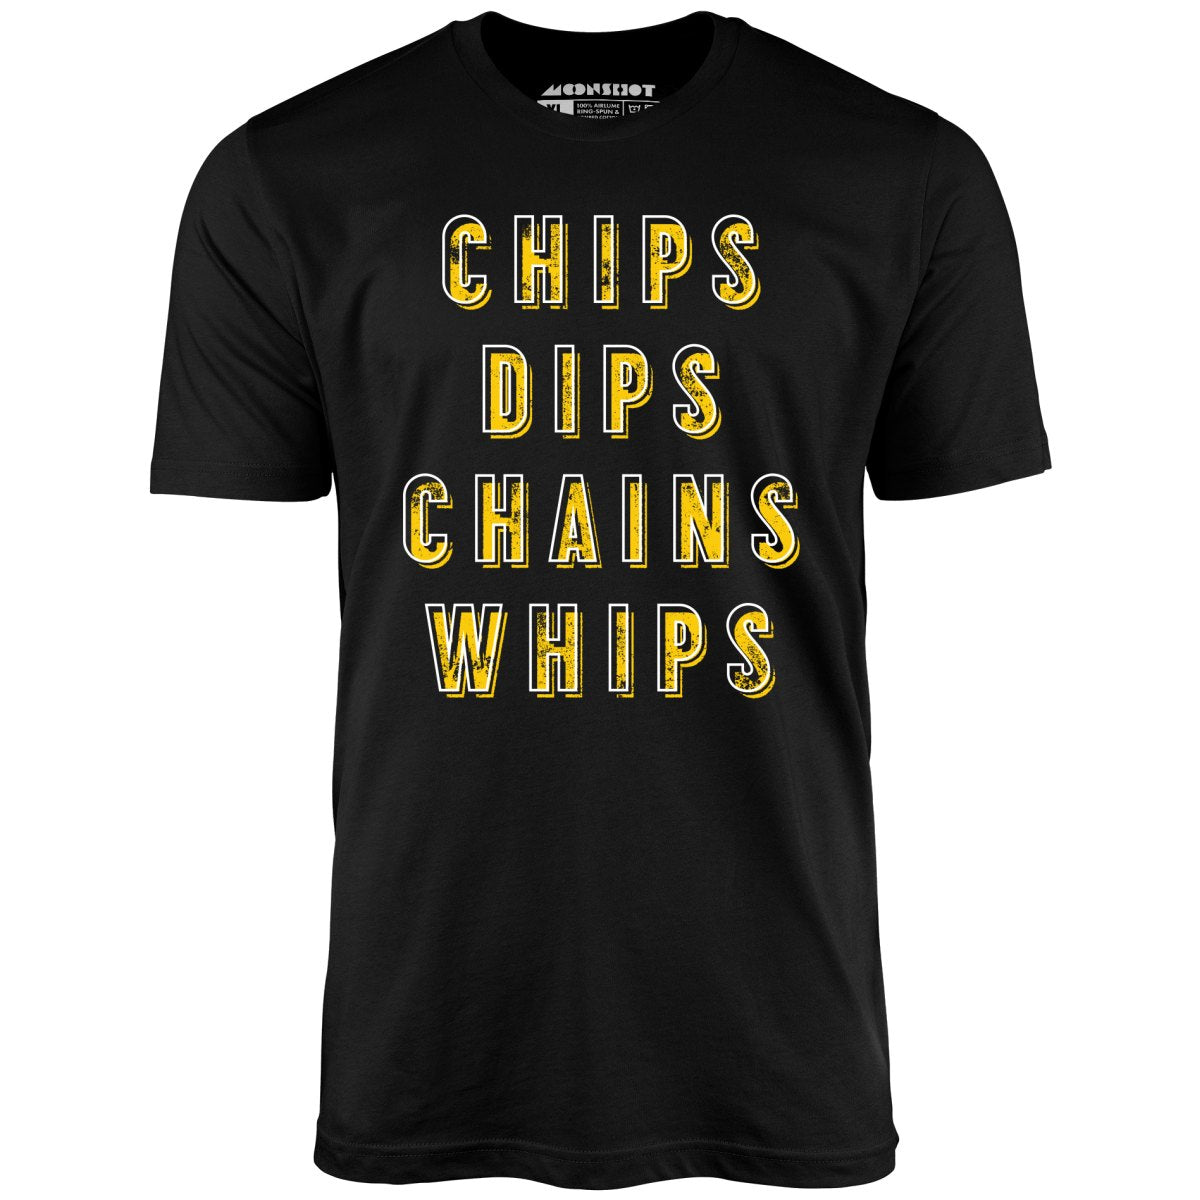 Chips Dips Chains Whips - Unisex T-Shirt